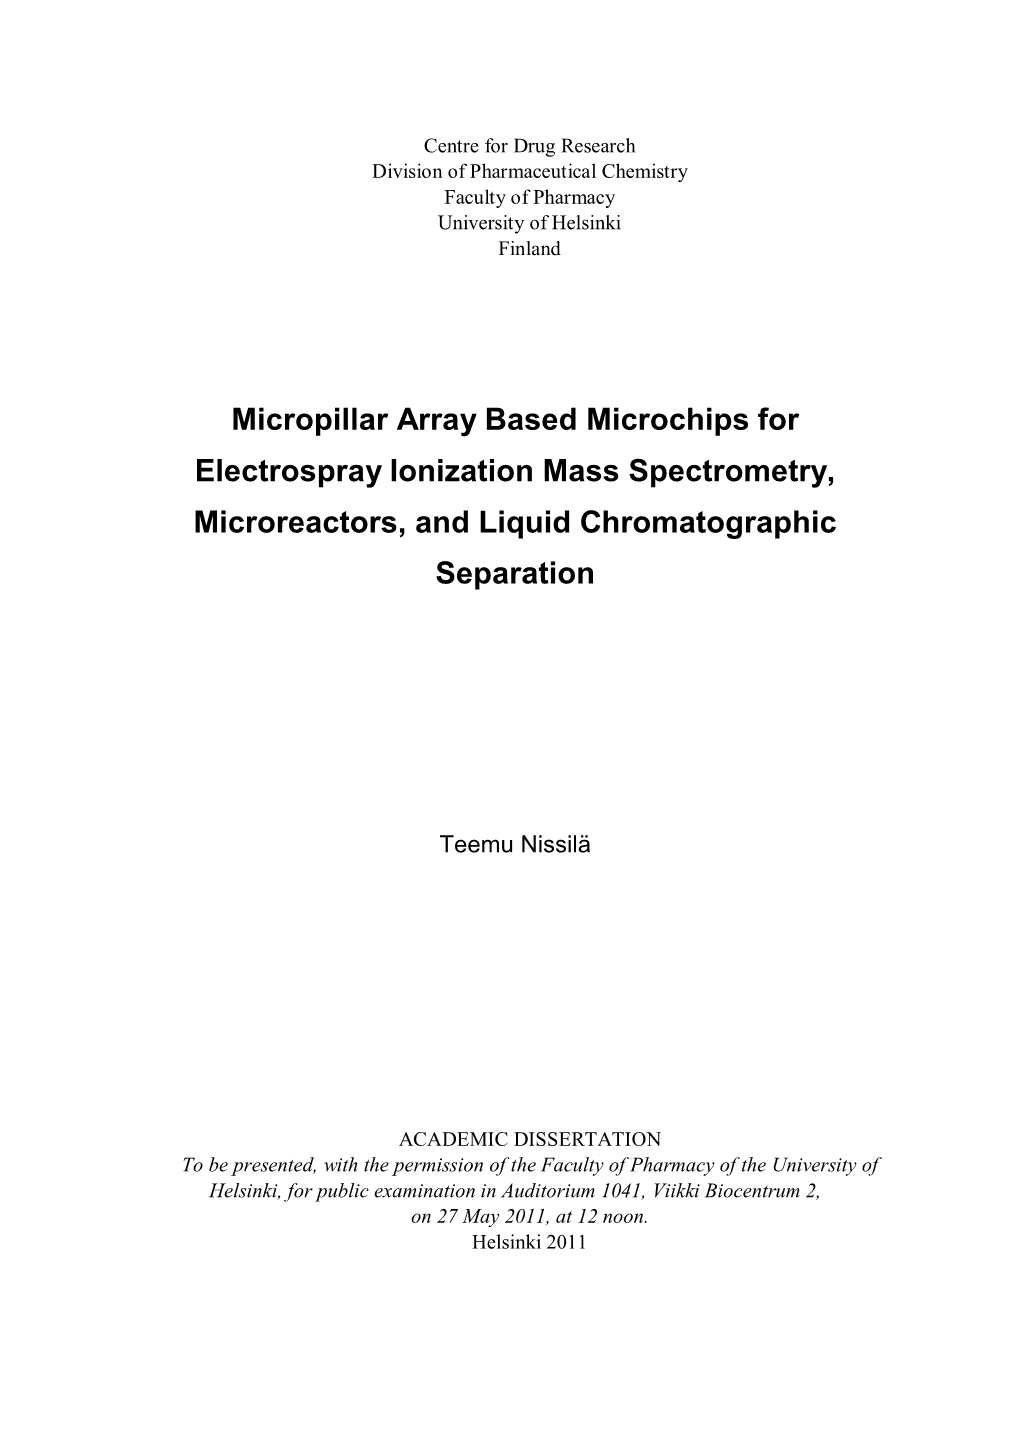 Micropillar Array Based Microchips for Electrospray Ionization Mass Spectrometry, Microreactors, and Liquid Chromatographic Separation